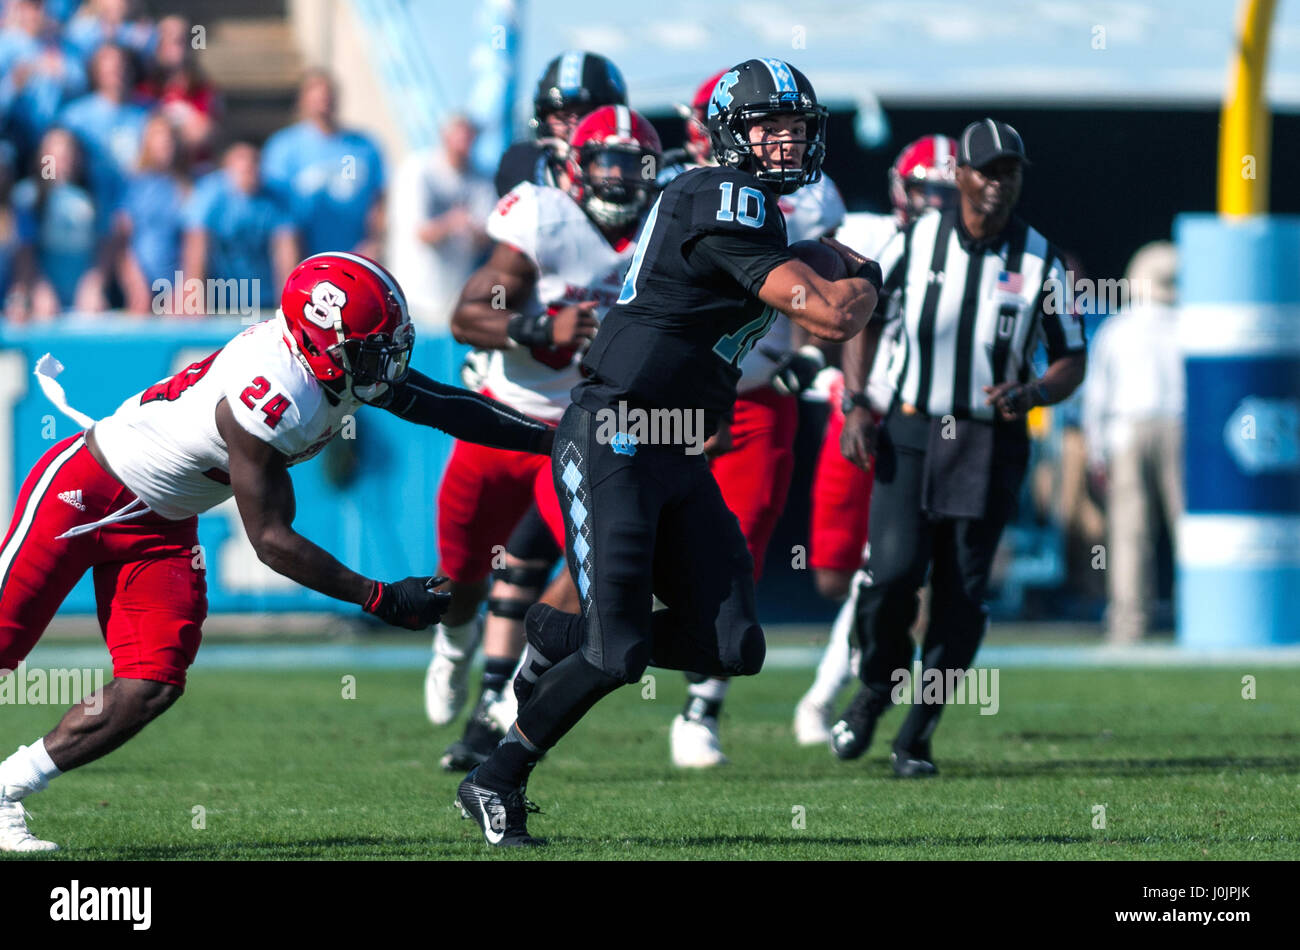 North Carolina Tar Heels quarterback Mitch Trubisky (10) eludes the grasp of North Carolina State Wolfpack safety Shawn Boone (24) during the first half of an NCAA football game between the North Carolina Tar Heels and the N.C. State Wolfpack at Kenan Memorial Stadium in Chapel Hill. Stock Photo